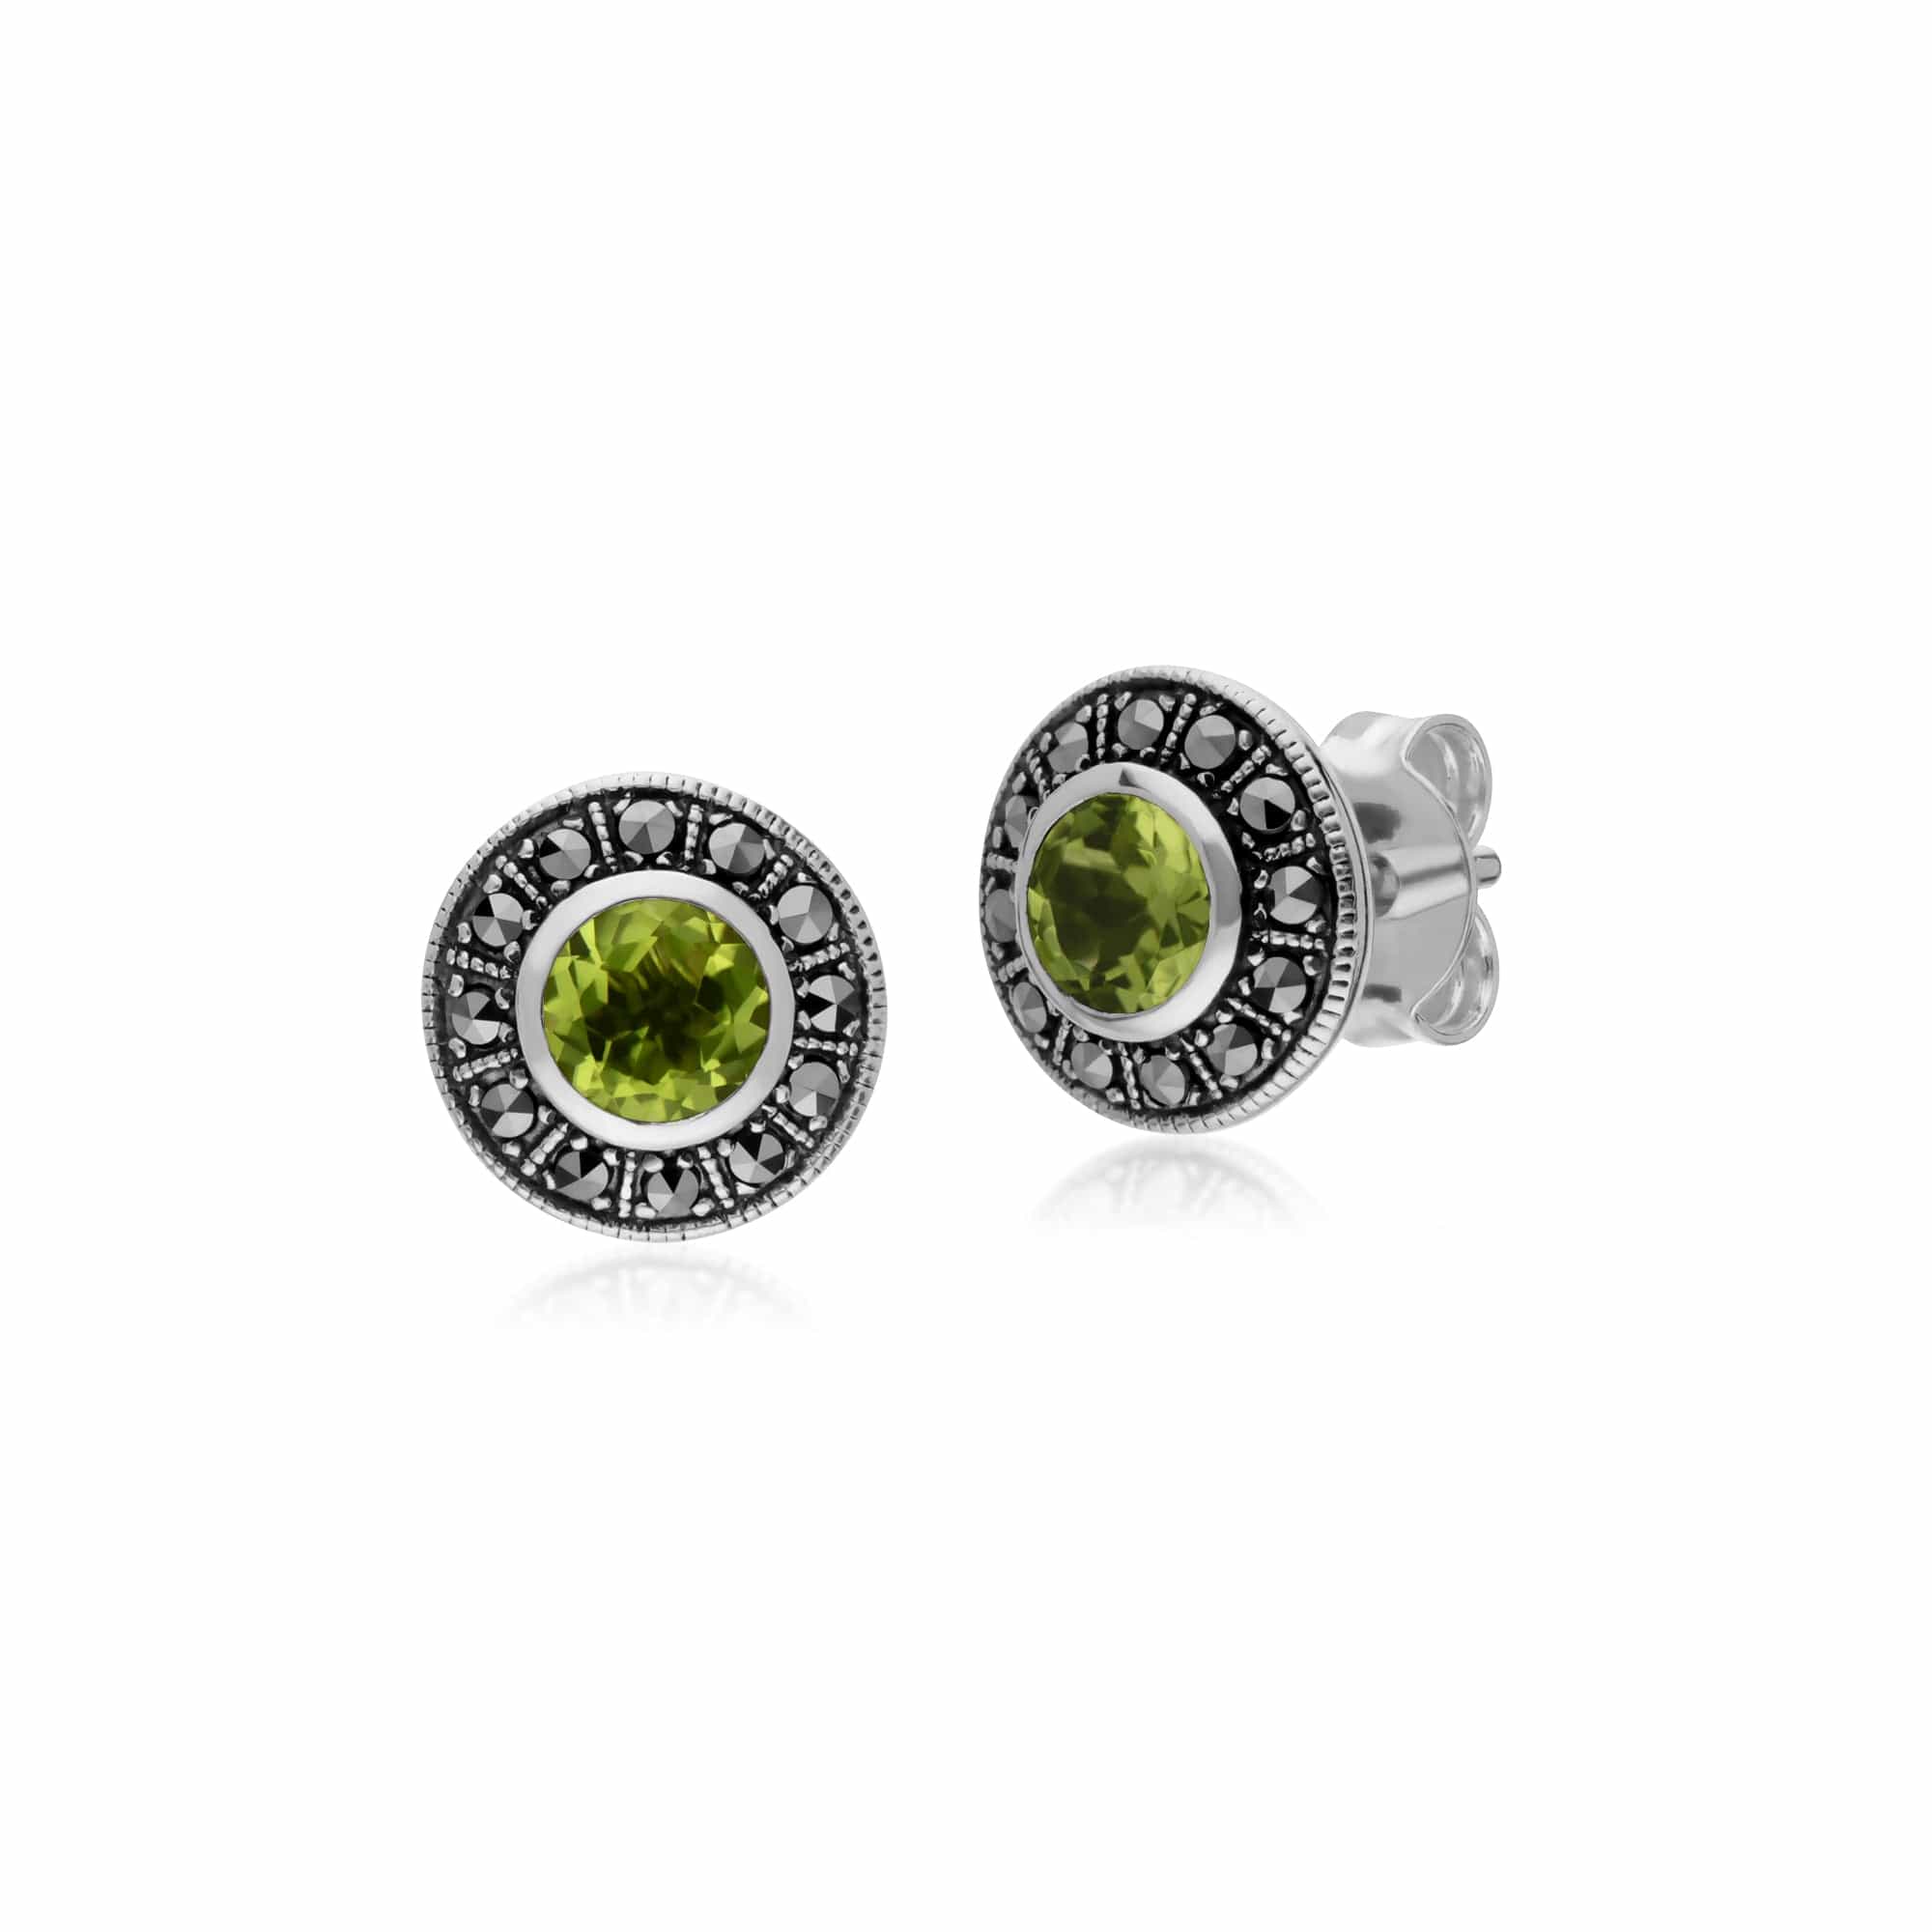 214E872704925 Gemondo Sterling Silver Round Peridot and Marcasite Cluster Stud Earrings 1